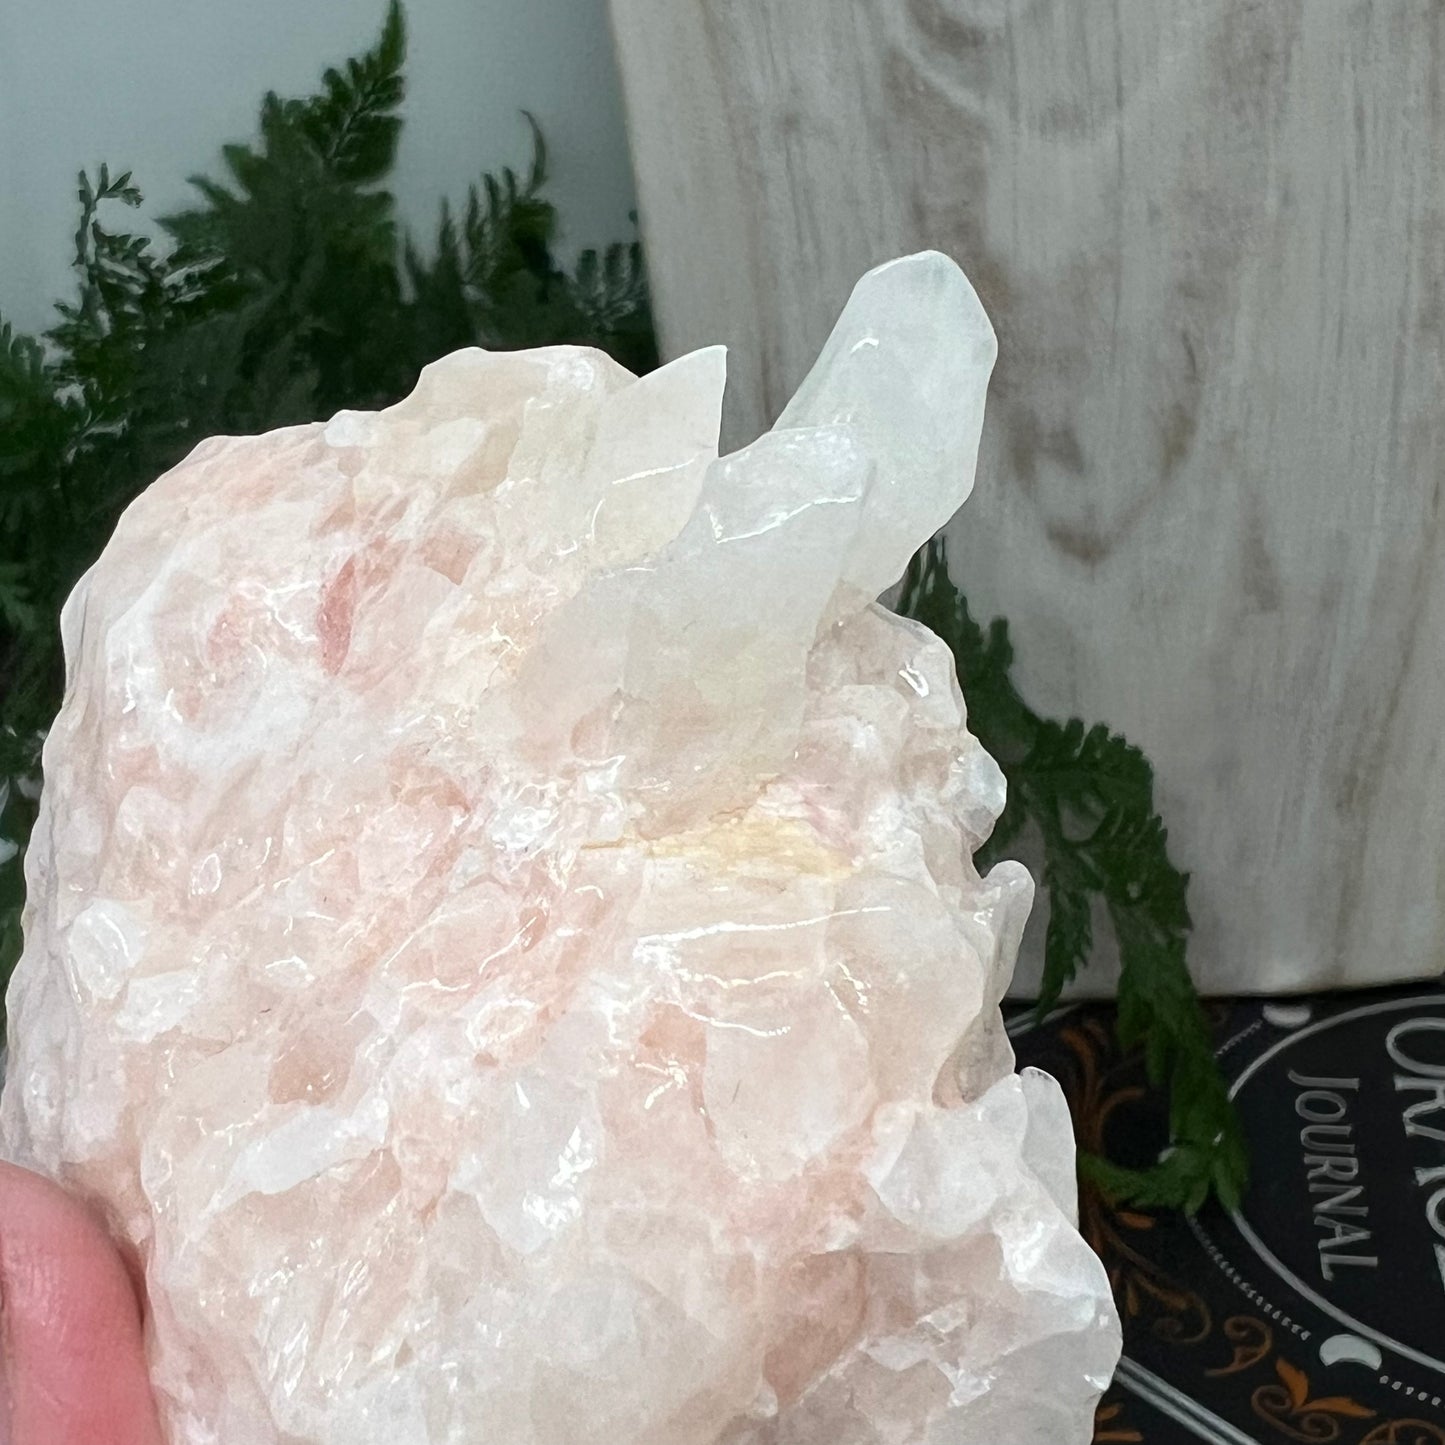 Pink Calcite Crystal - Large Rough Pale Pink Calcite Crystal Chunk